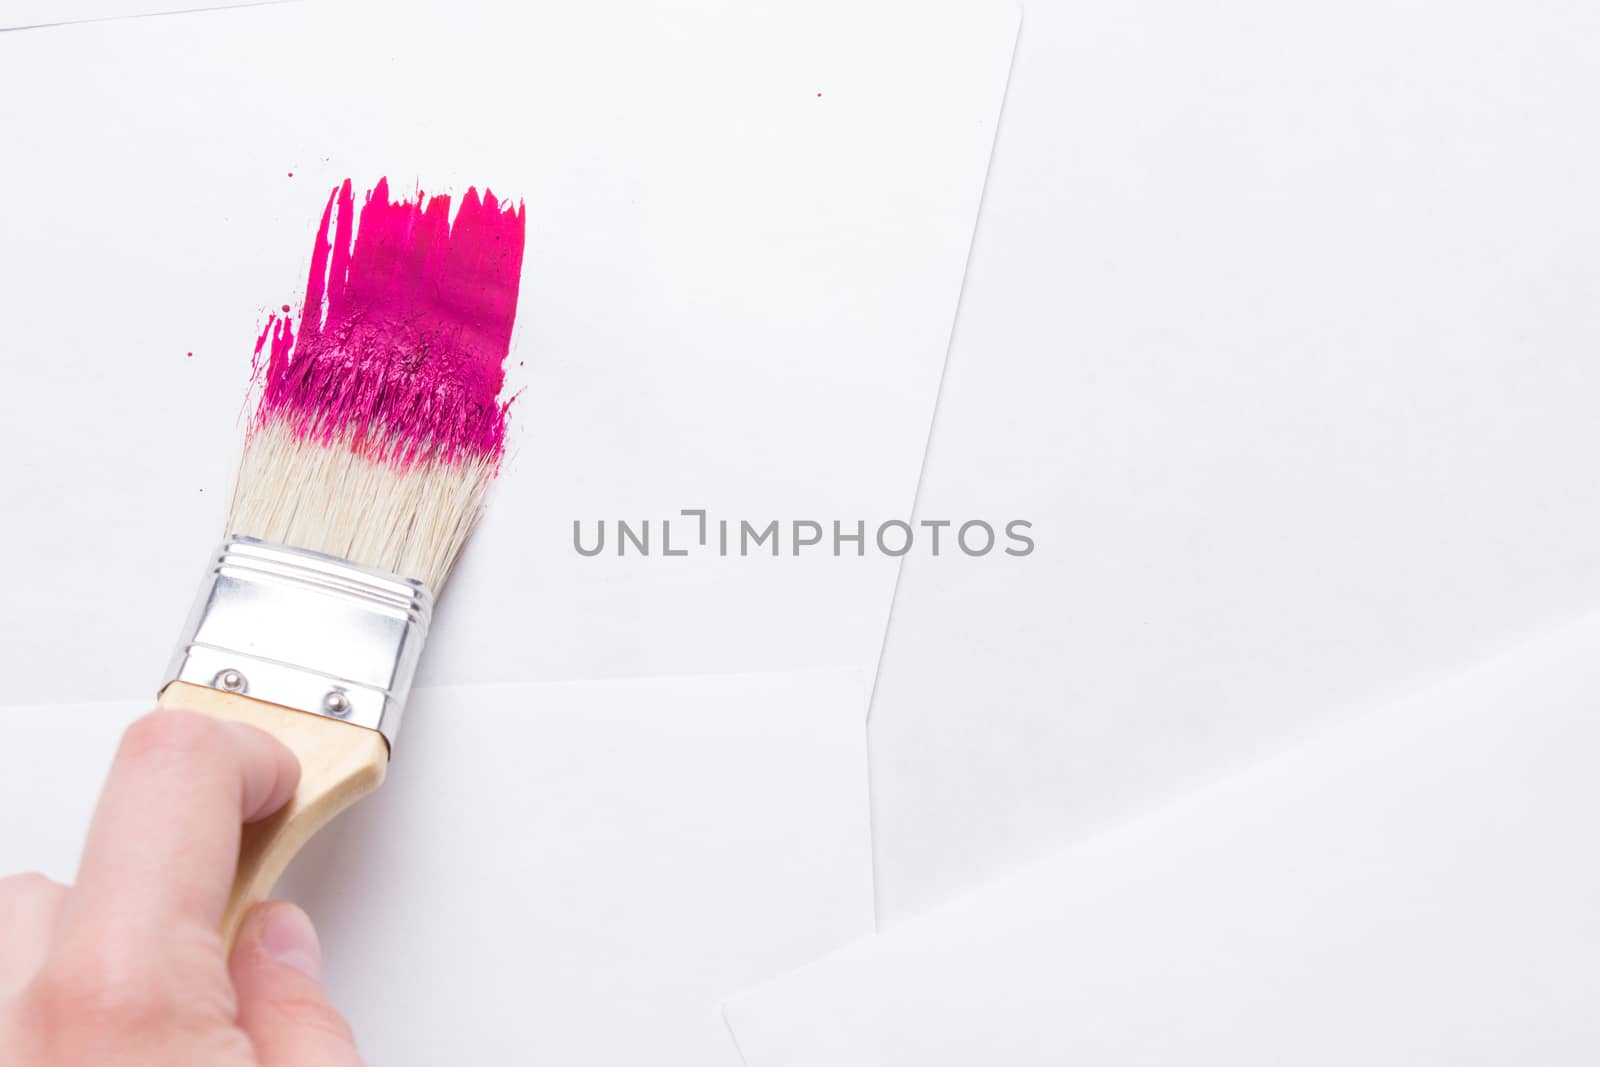 construction brush in hand on white background. not isolated by liwei12